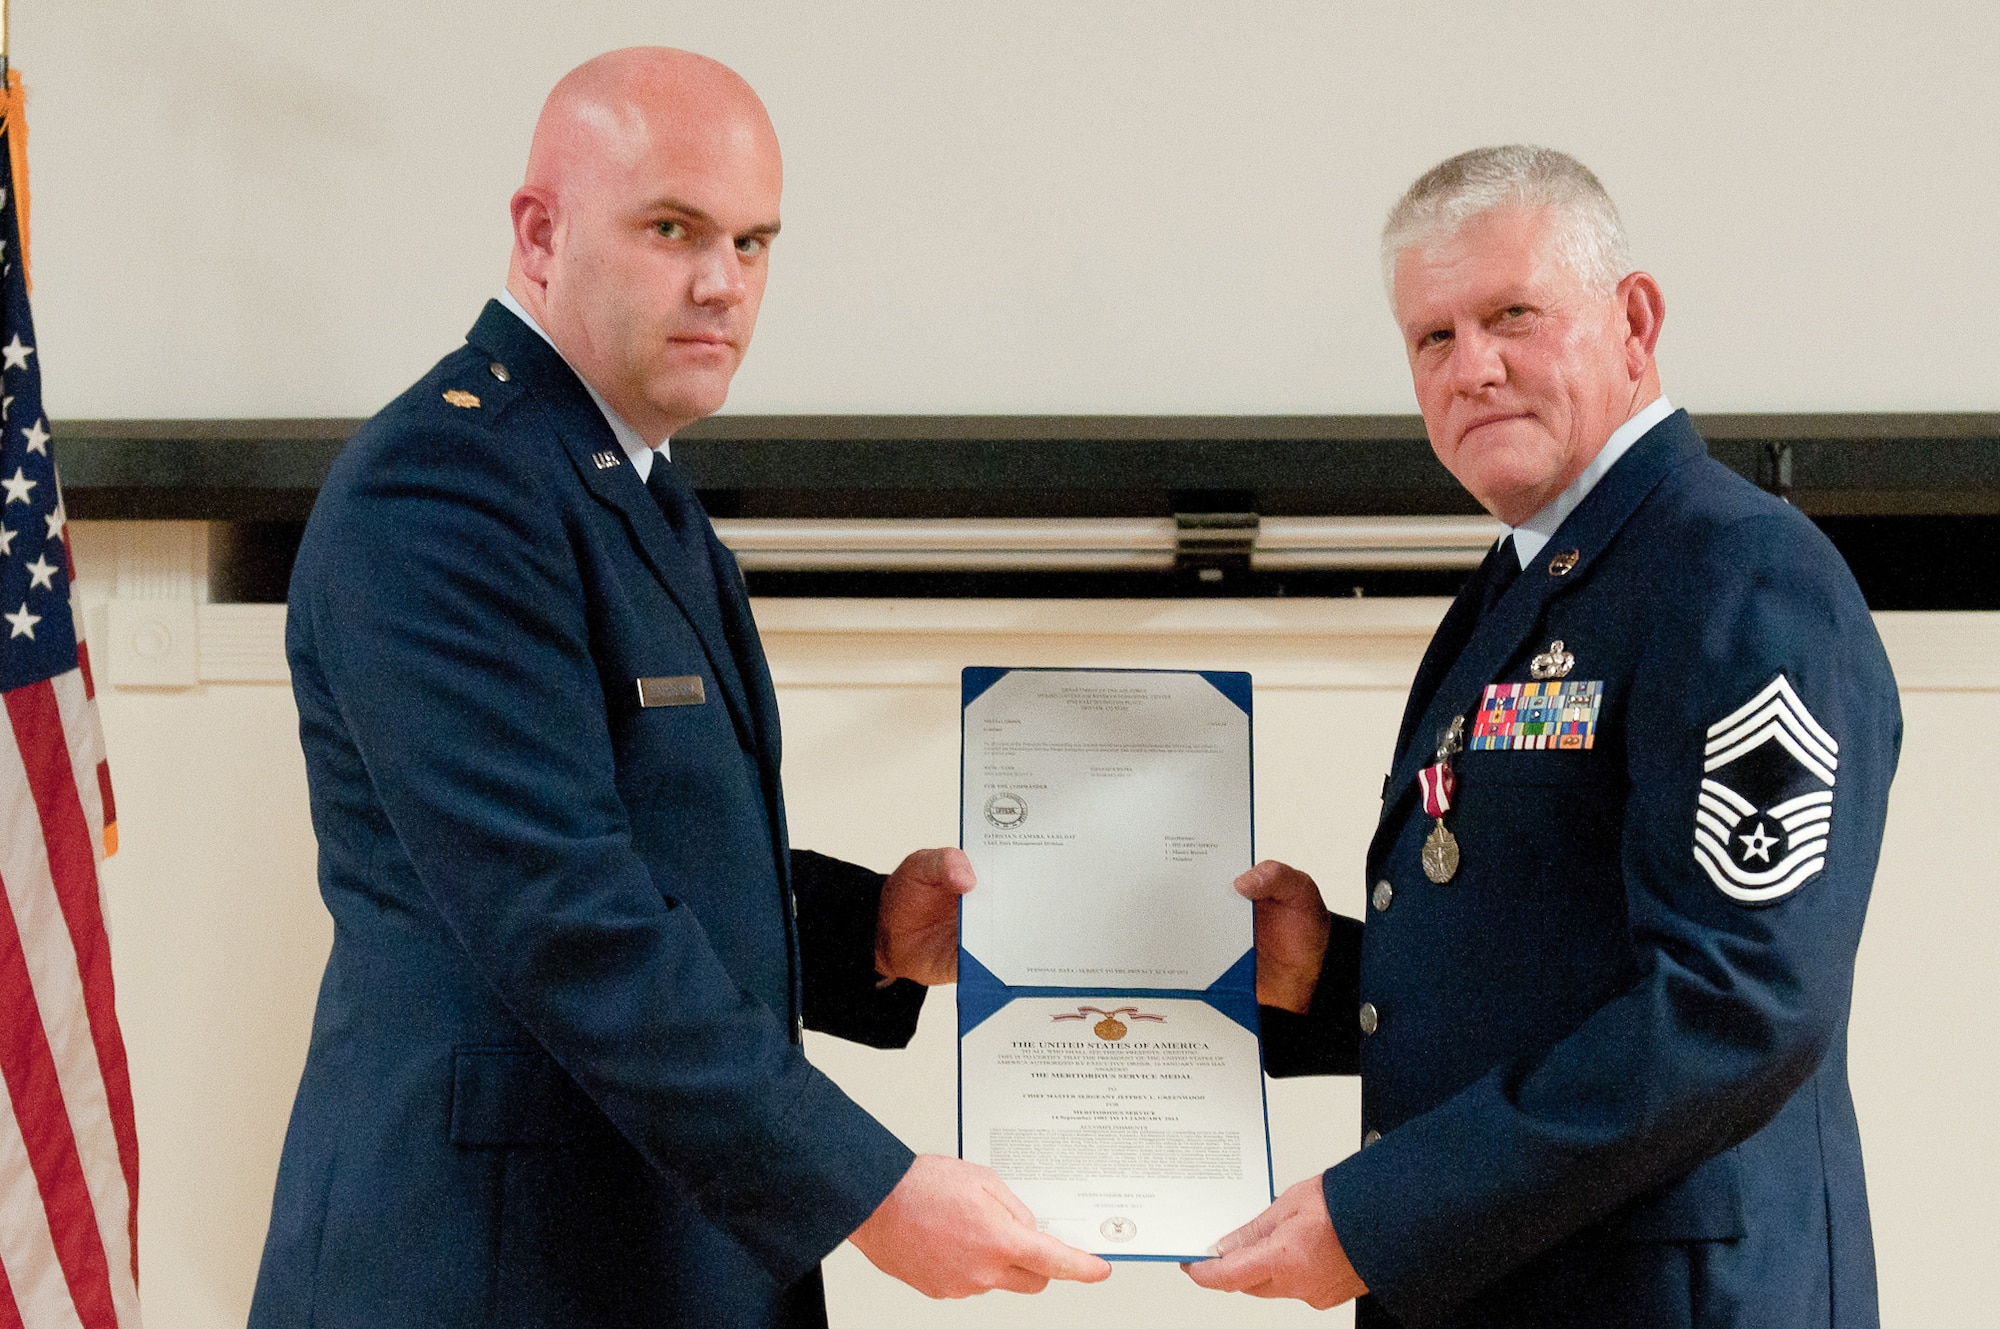 Chief Master Sgt. Jeffrey L. Greenwood (right) is presented with a Meritorious Service Medal by Maj. Kevin E. Thornberry, commander of the 123rd Logistics Readiness Squadron, during a retirement ceremony held in Greenwood’s honor at the Kentucky Air National Guard Base in Louisville, Ky., on Jan. 13, 2013. Greenwood, the 123rd Airlift Wing's vehicle fleet manager, served in the active-duty Air Force and Air National Guard for 32 years. (U.S. Air Force photo illustration by Airman Joshua Horton)